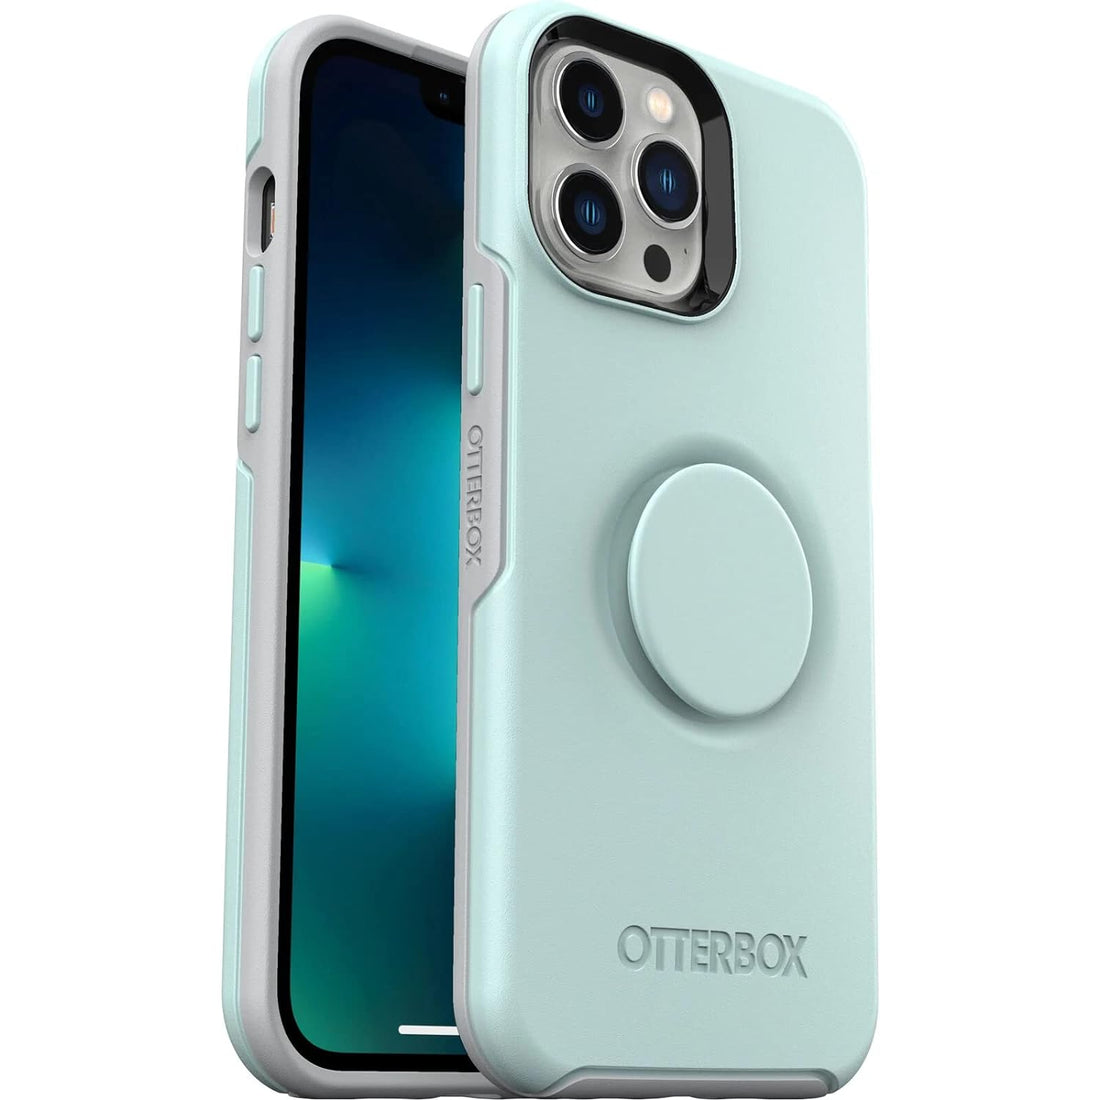 OtterBox + Pop Symmetry Series Case for iPhone 13 Pro Max & iPhone 12 Pro Max (Only) - Non-Retail Packaging - Tranquil Waters (Light Teal/Grey)